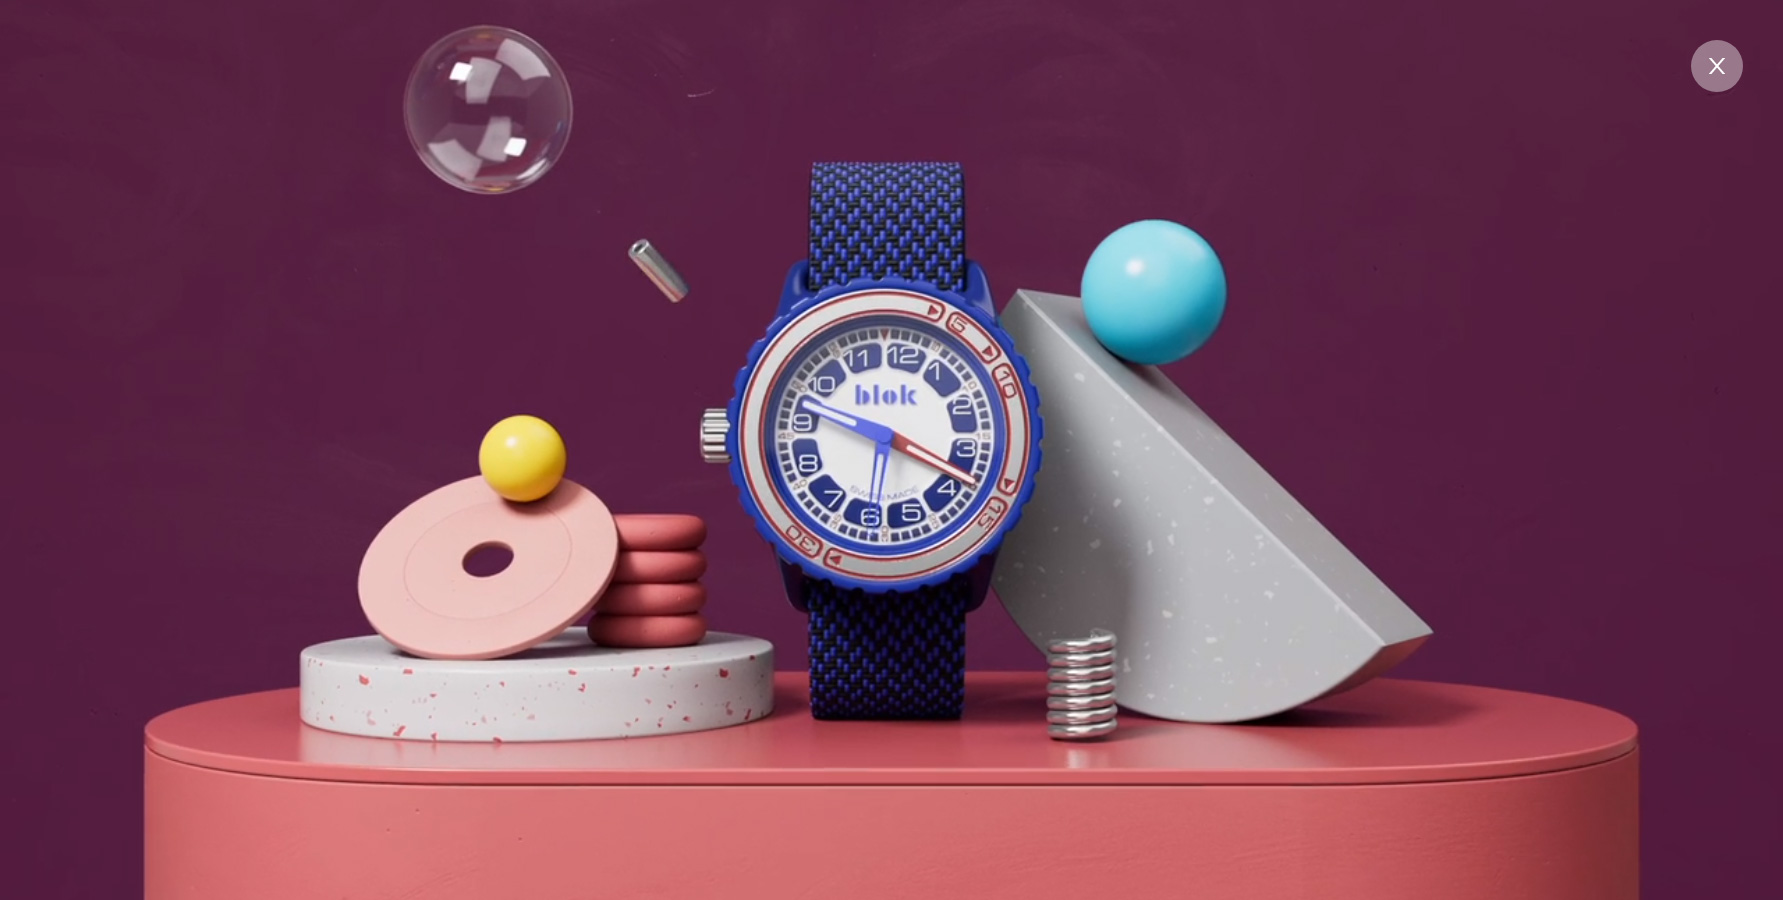 Blok Watches - Website of the Day